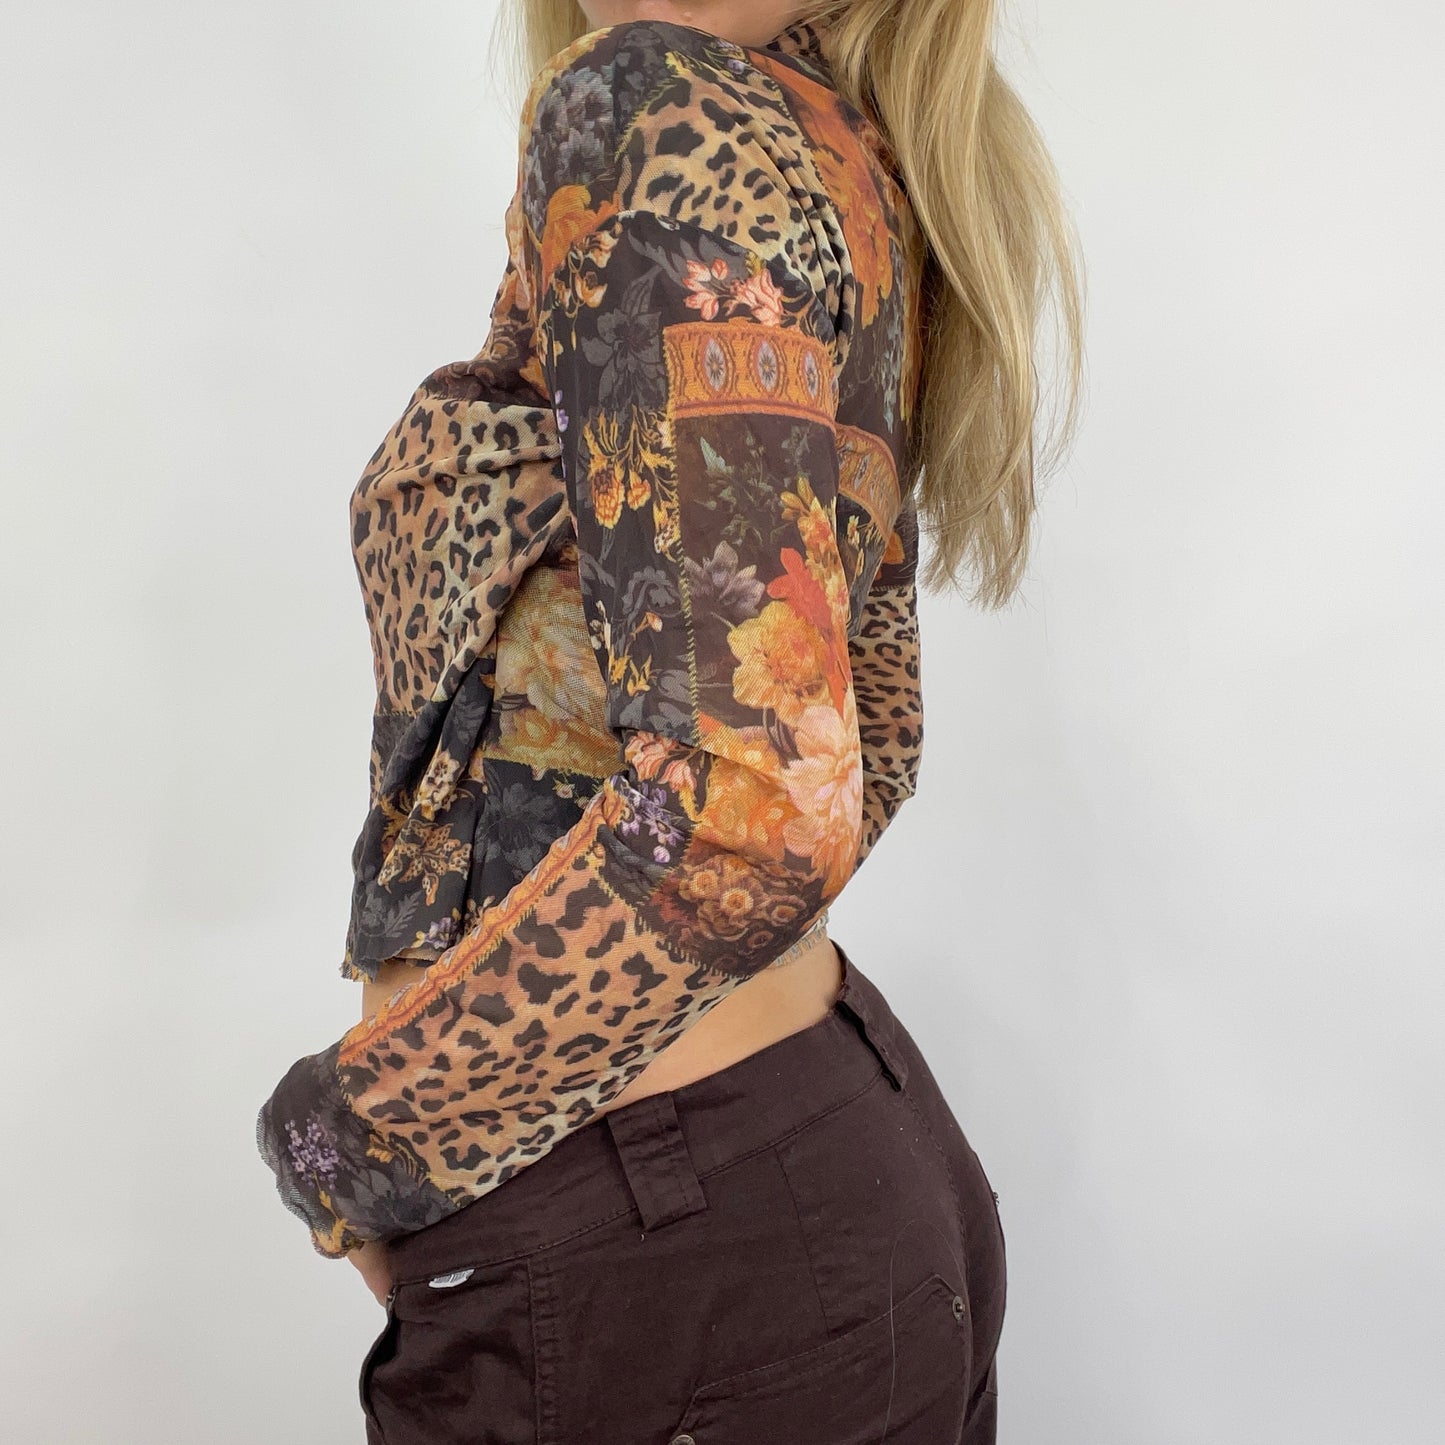 STUDIO FAVES | small black patterned animal print long sleeve top